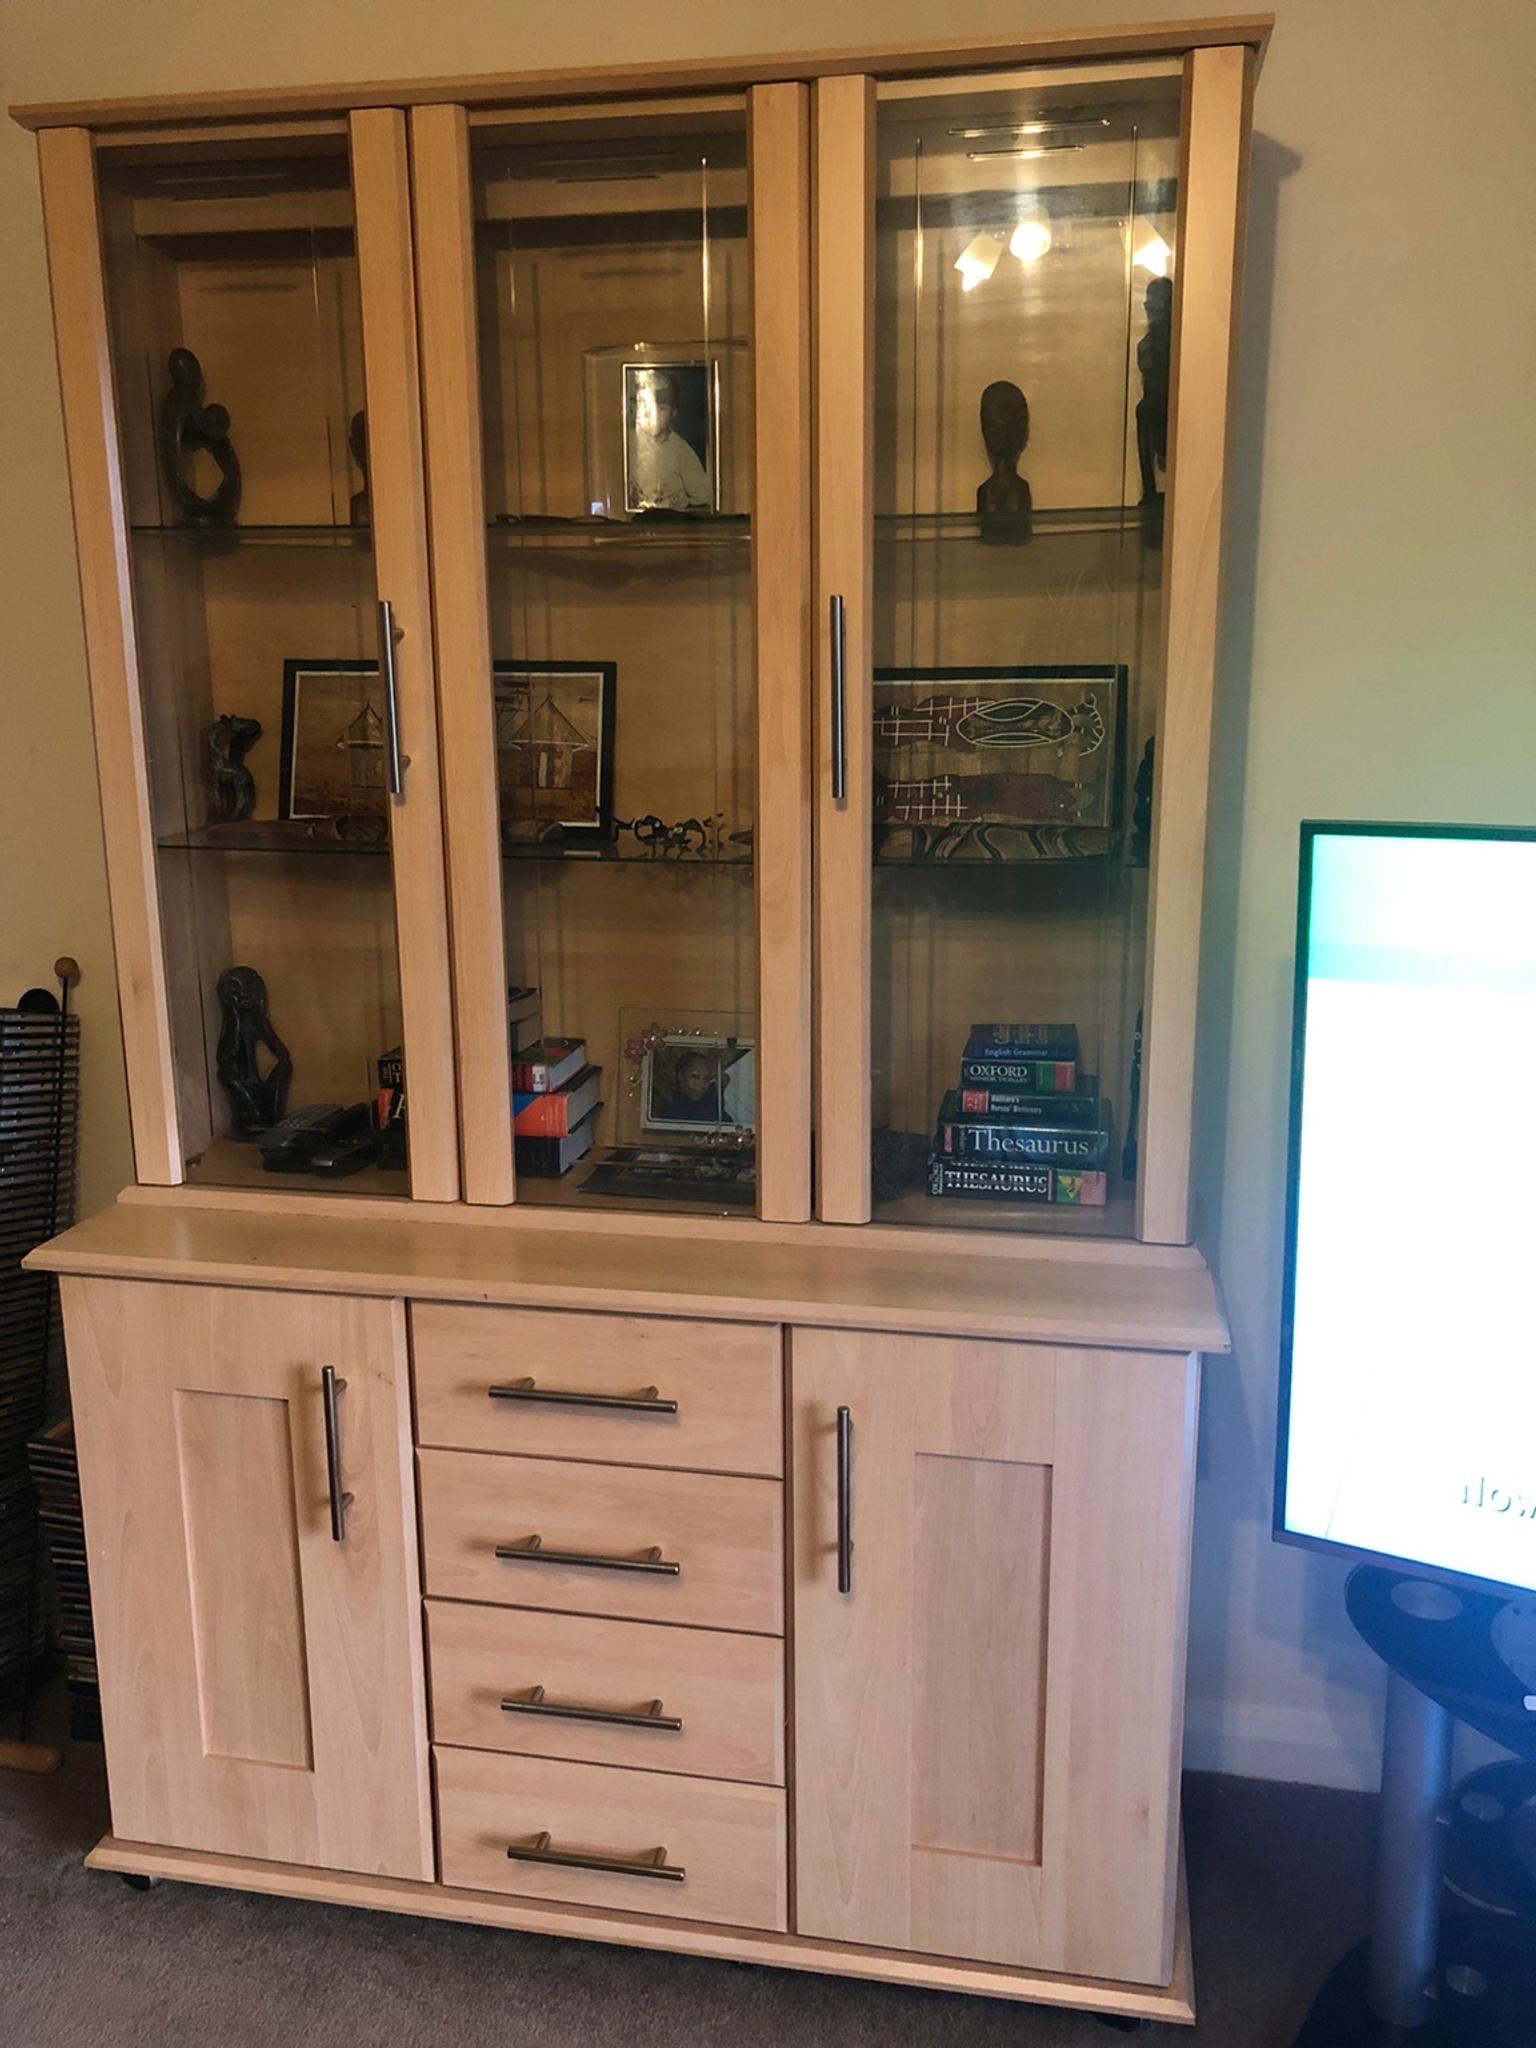 Display Cabinet In Shoeburyness For 6000 For Sale Shpock